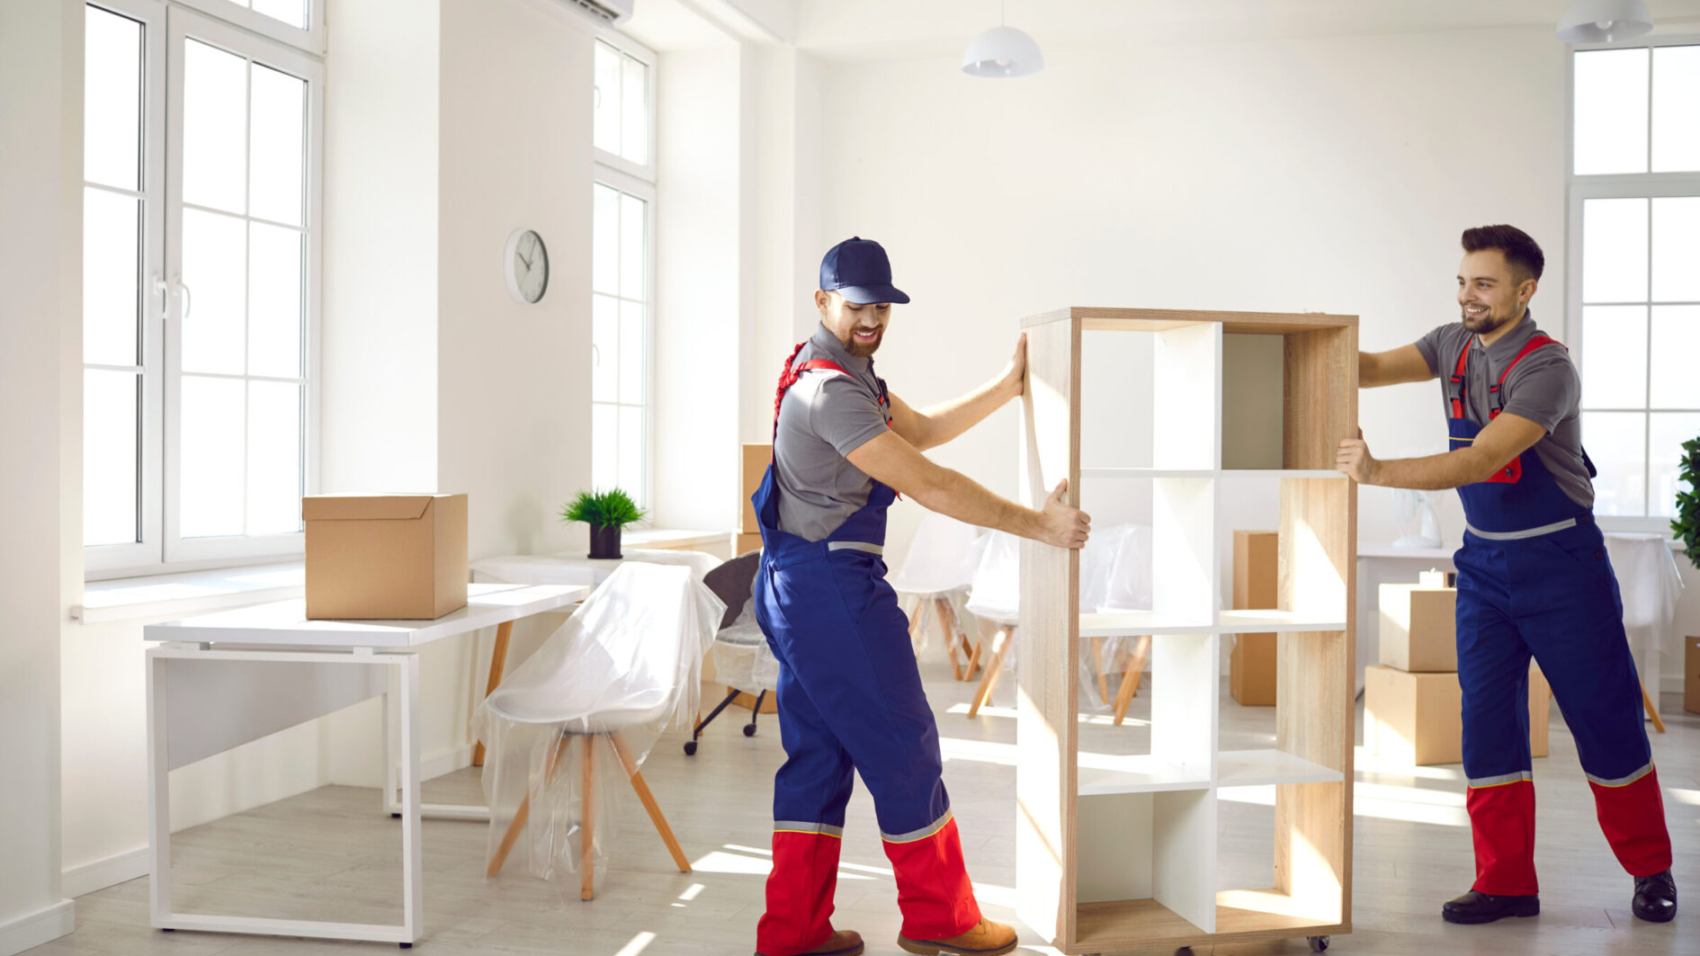 Making sure your office space is clear of any obstacles and old furniture will ease the installation process.